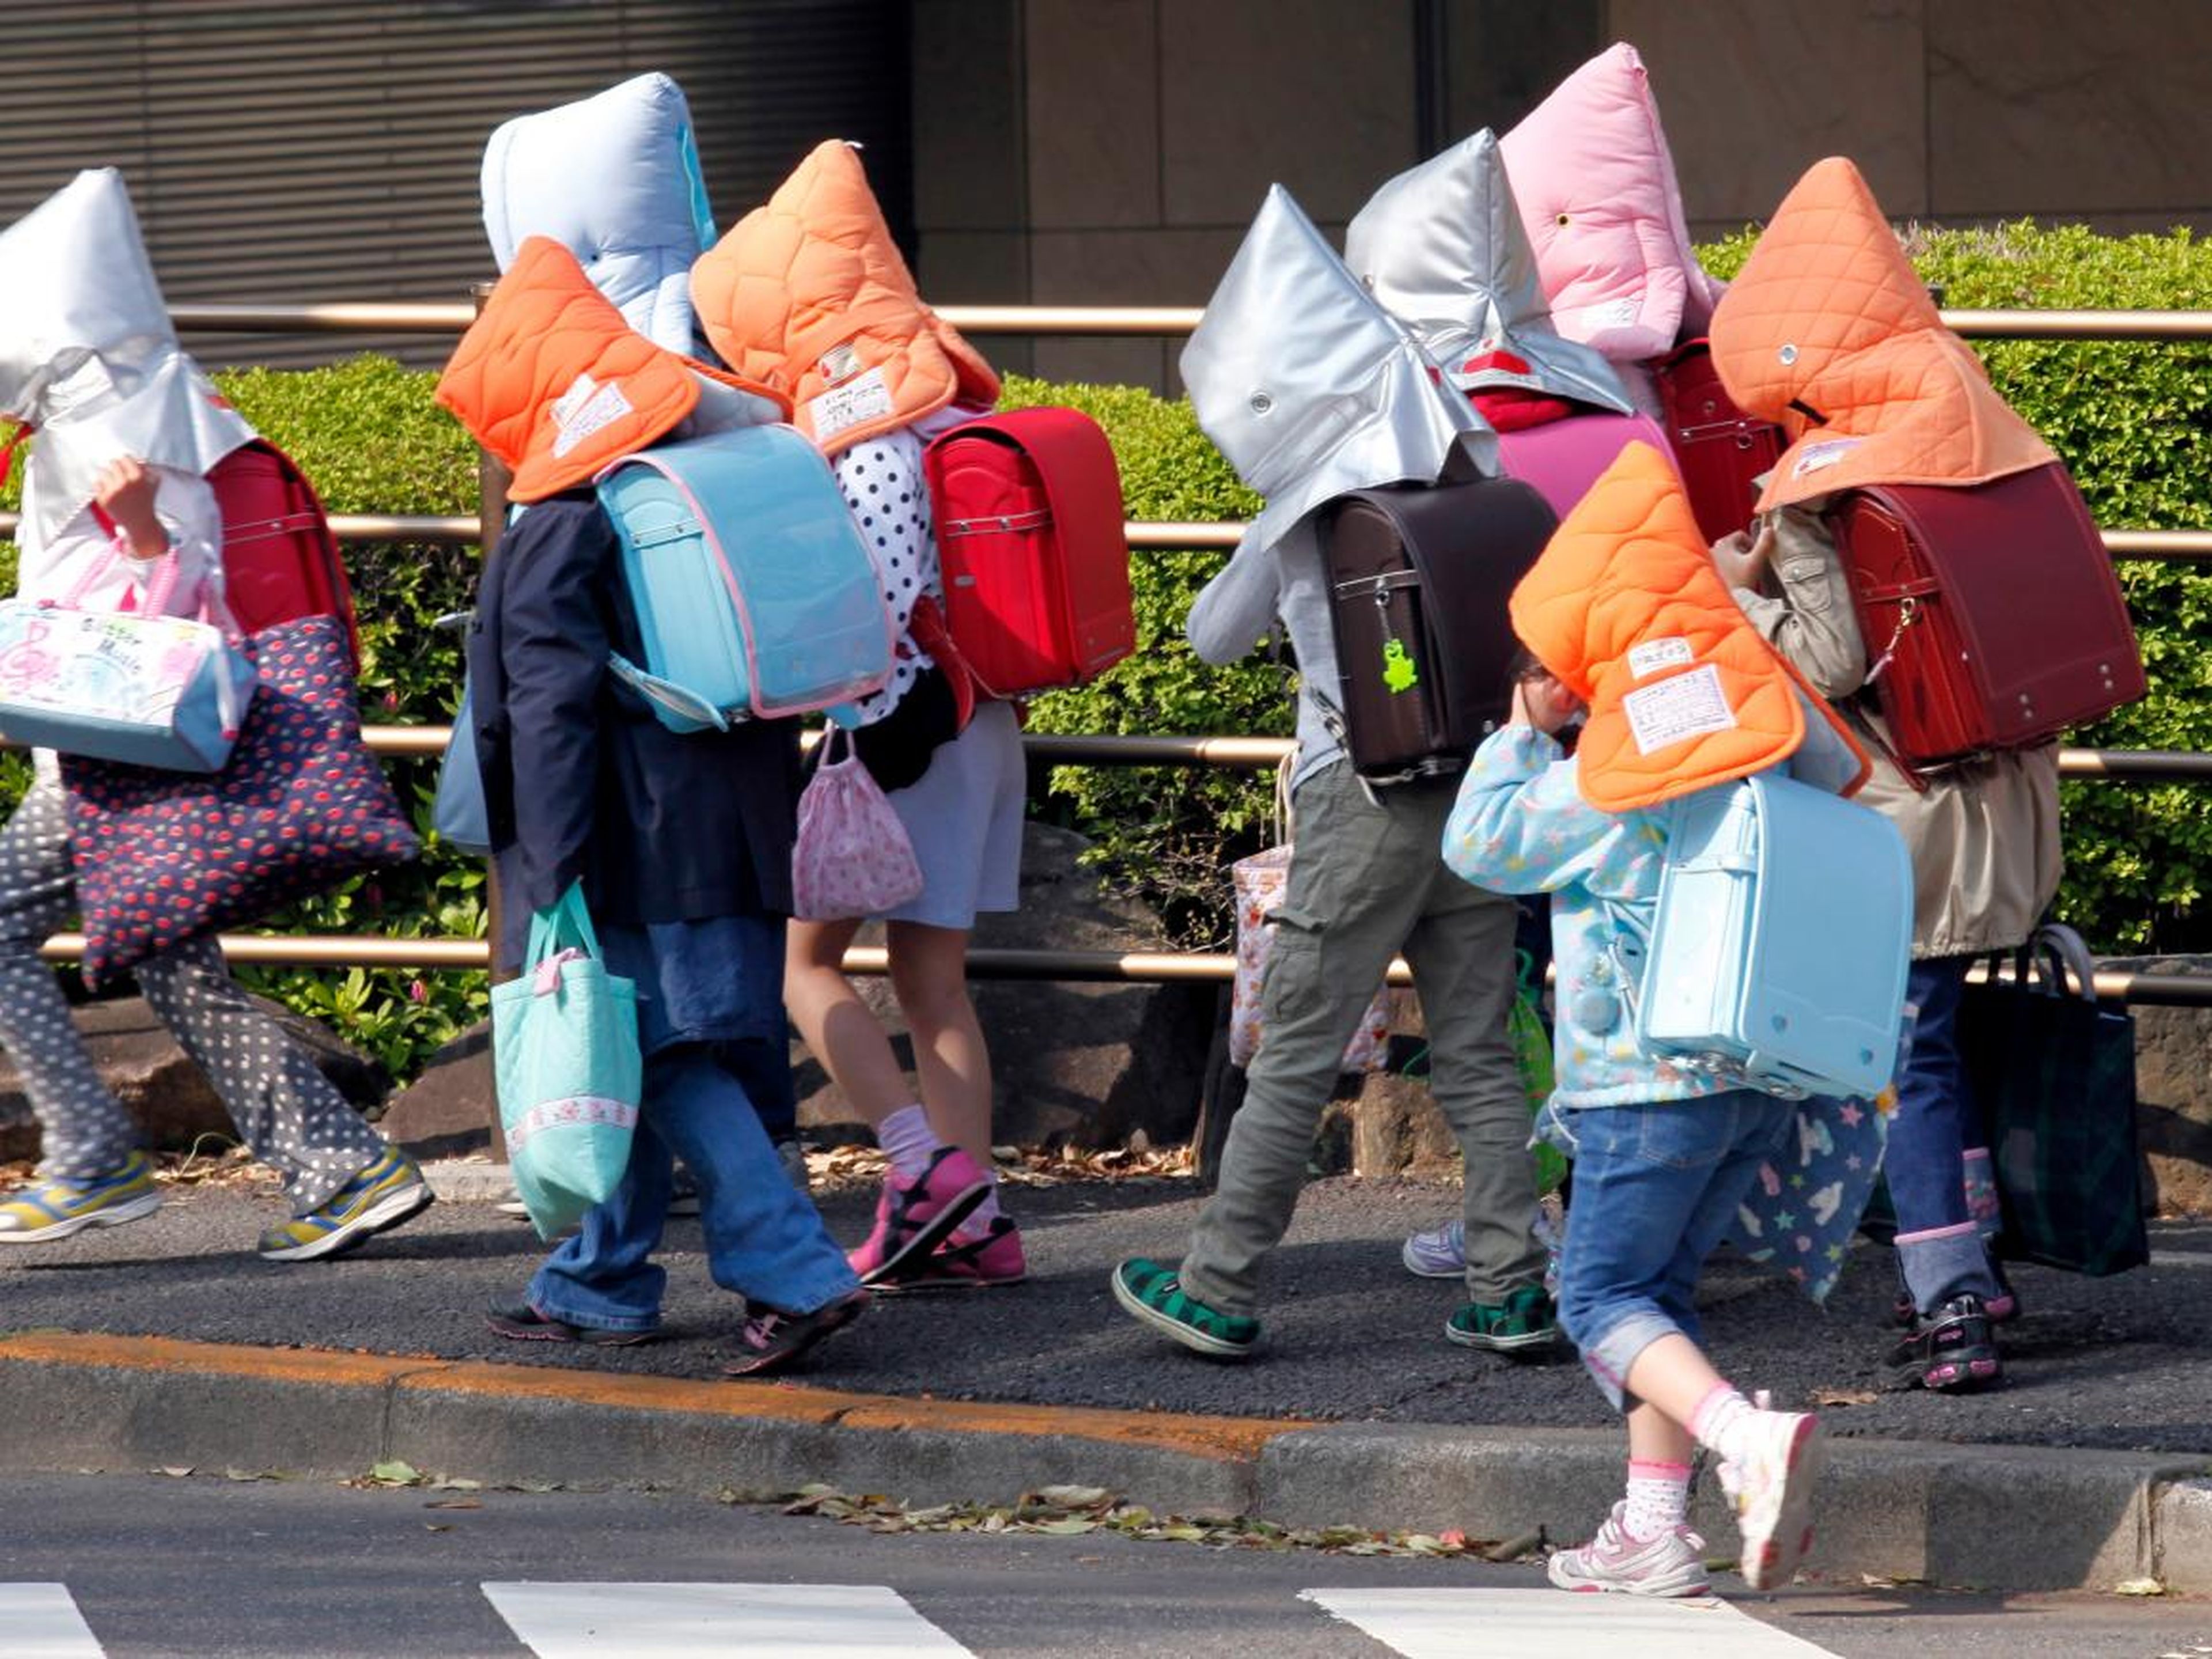 In earthquake- and tsunami-prone Tokyo, some schools ask parents to give their kids protective headgear in case a natural disaster strikes.